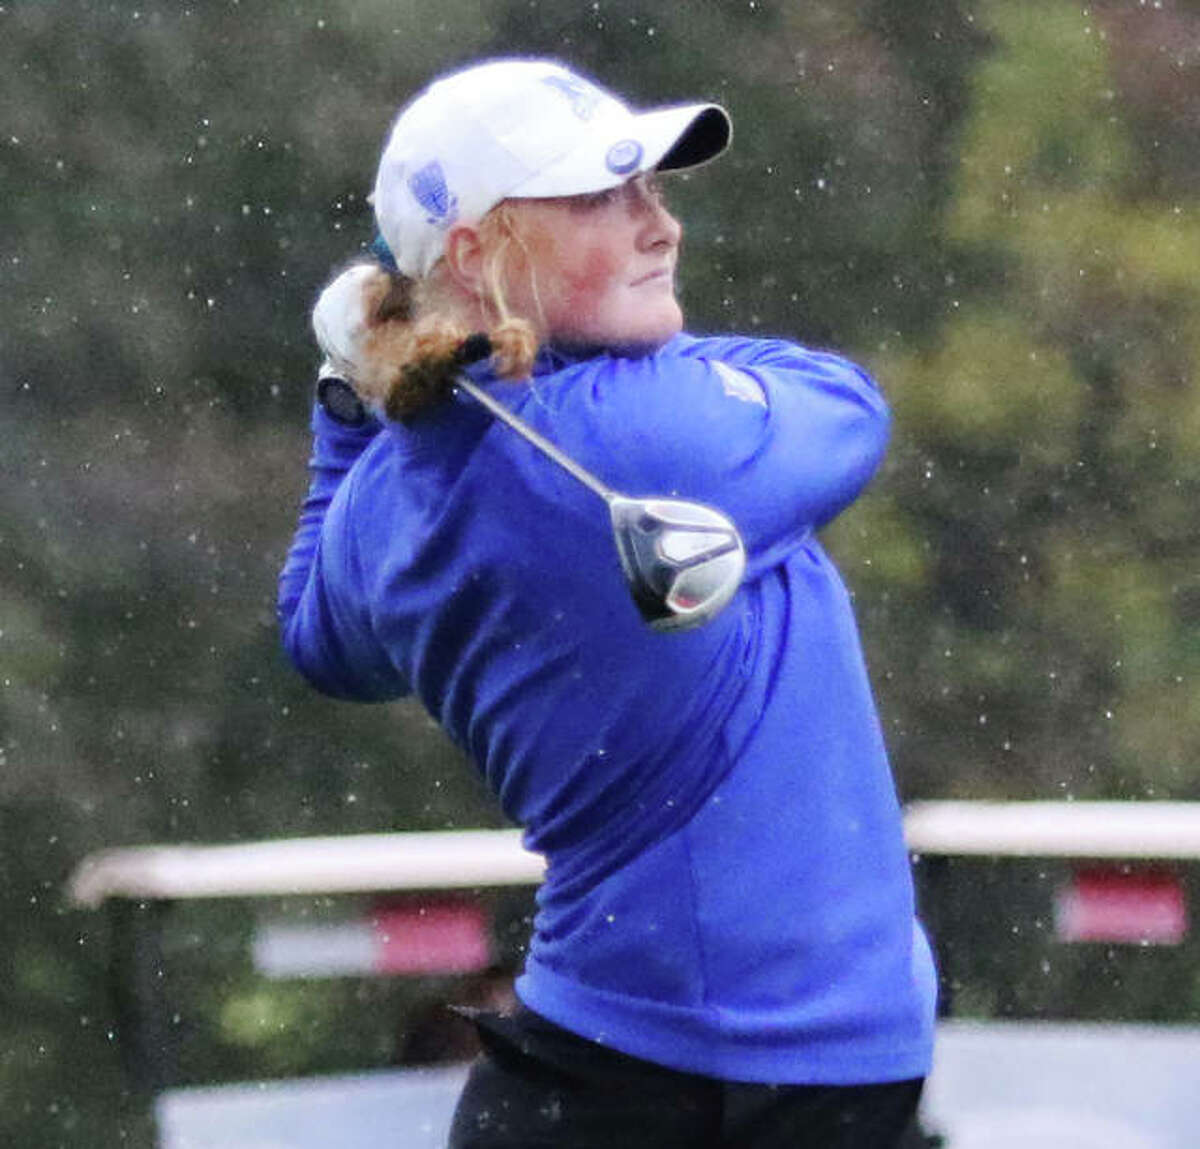 Marquette’s Gracie Piar fired a seven-over par 79 Saturday and finished 17th out of 71 golfers at the IHSA Class 1A Girls Golf Sectional Tournament at Red Tail Run Golf Course in Decatur.